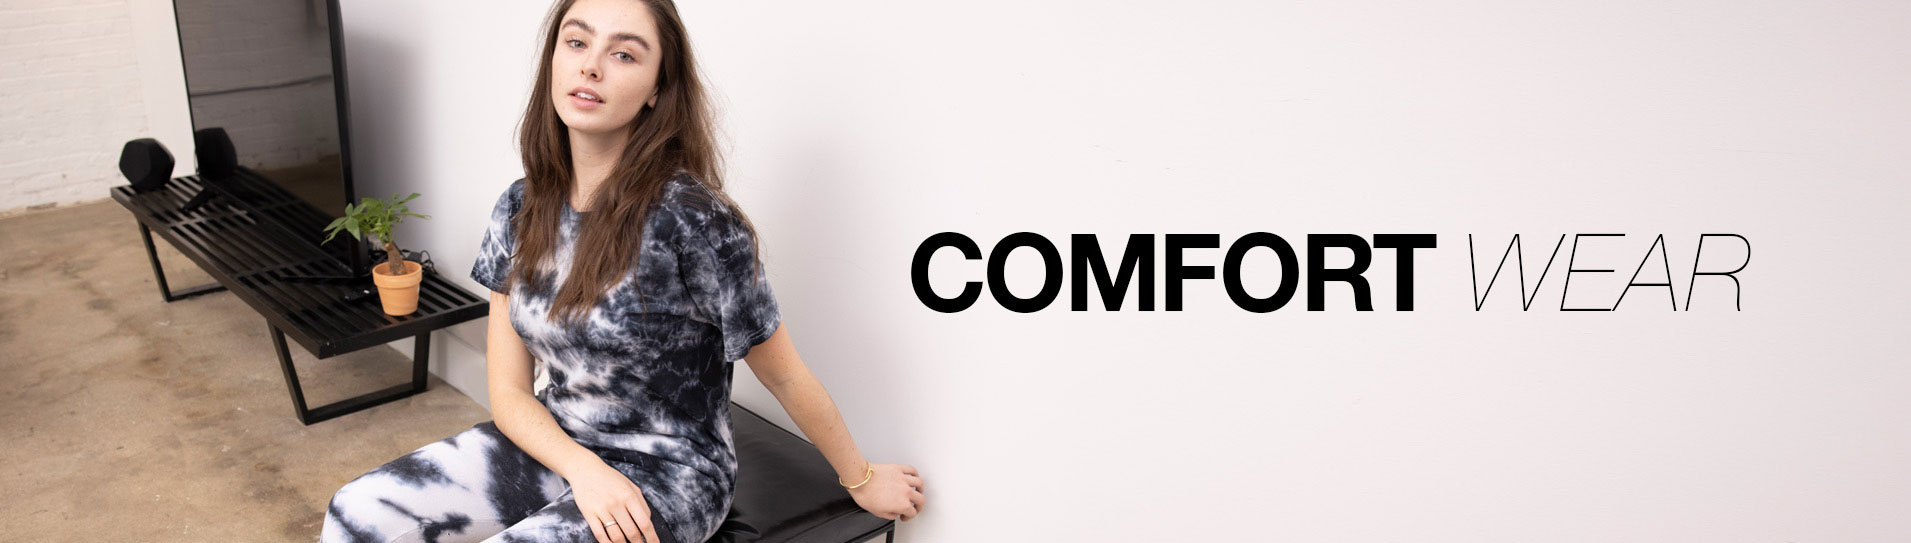 Comfort Wear Collection Banner